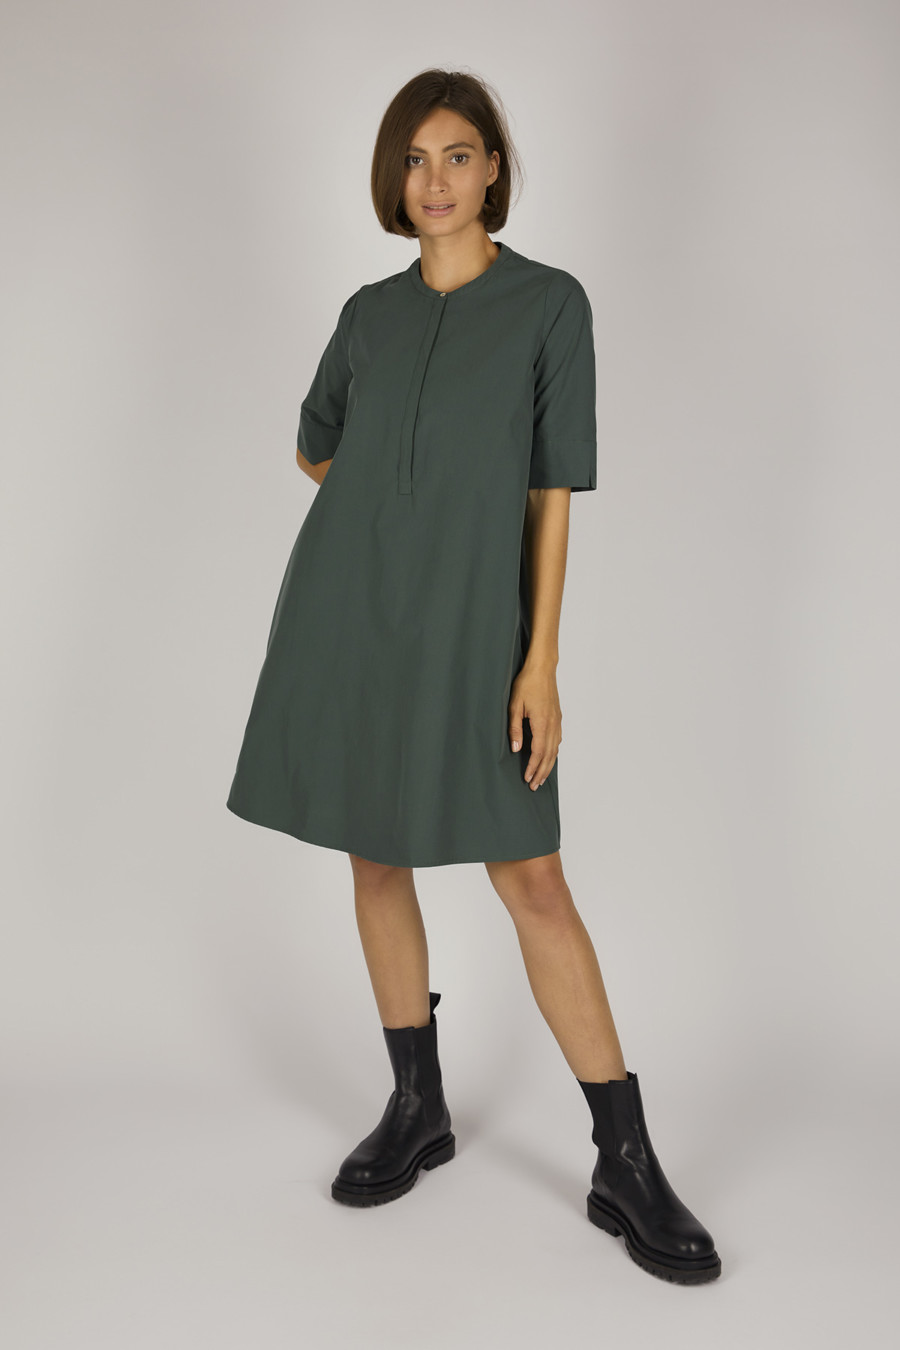 PHOEBE - Shirt blouse dress with extended half sleeve - color: Moss